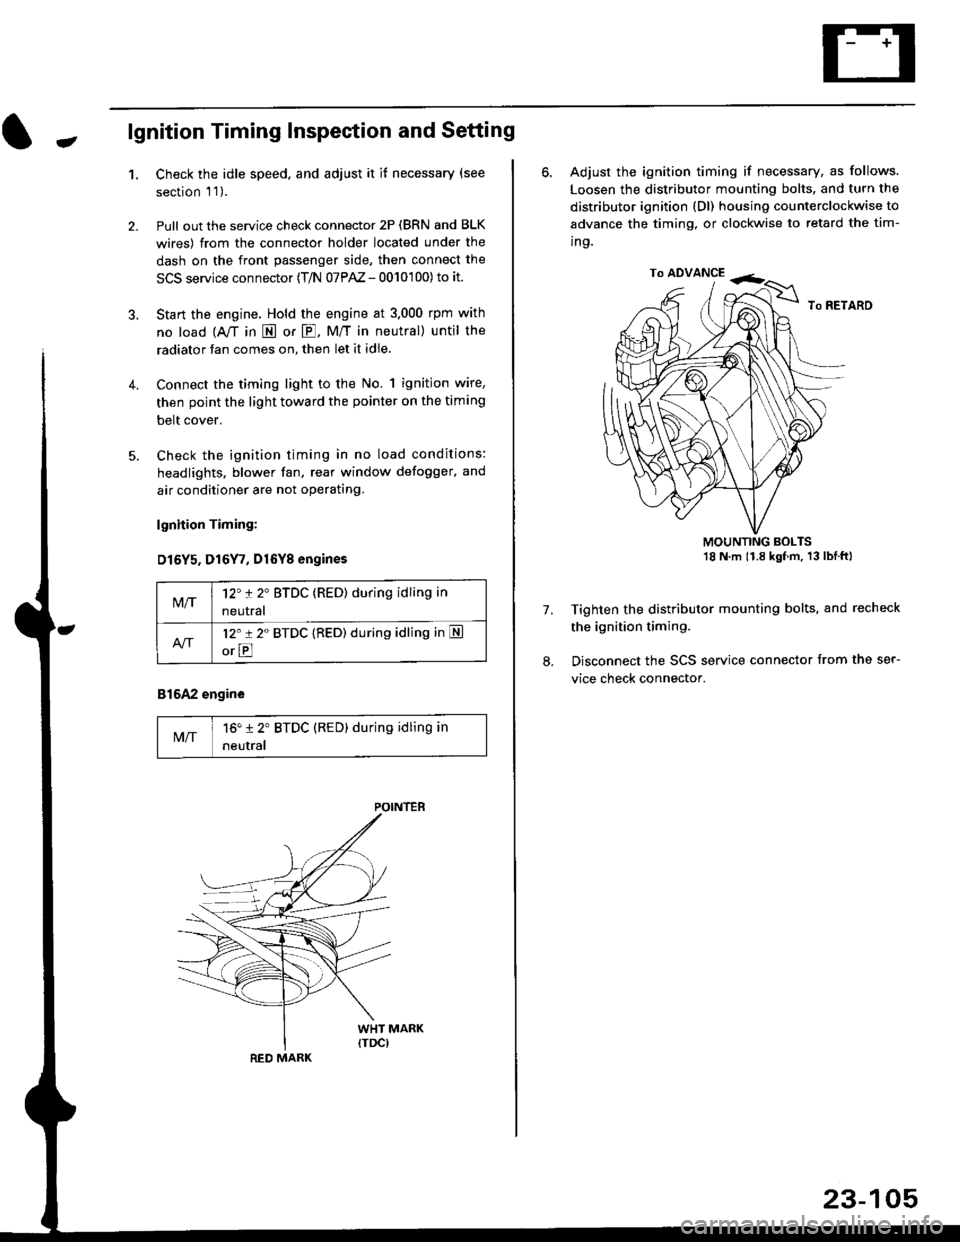 HONDA CIVIC 1996 6.G Owners Guide -lgnition Timing Inspection and Setting
1.Check the idle speed, and adjust it it necessary (see
section l 1 ).
Pull out the service check connector 2P (BRN and BLK
wires) from the connector holder l